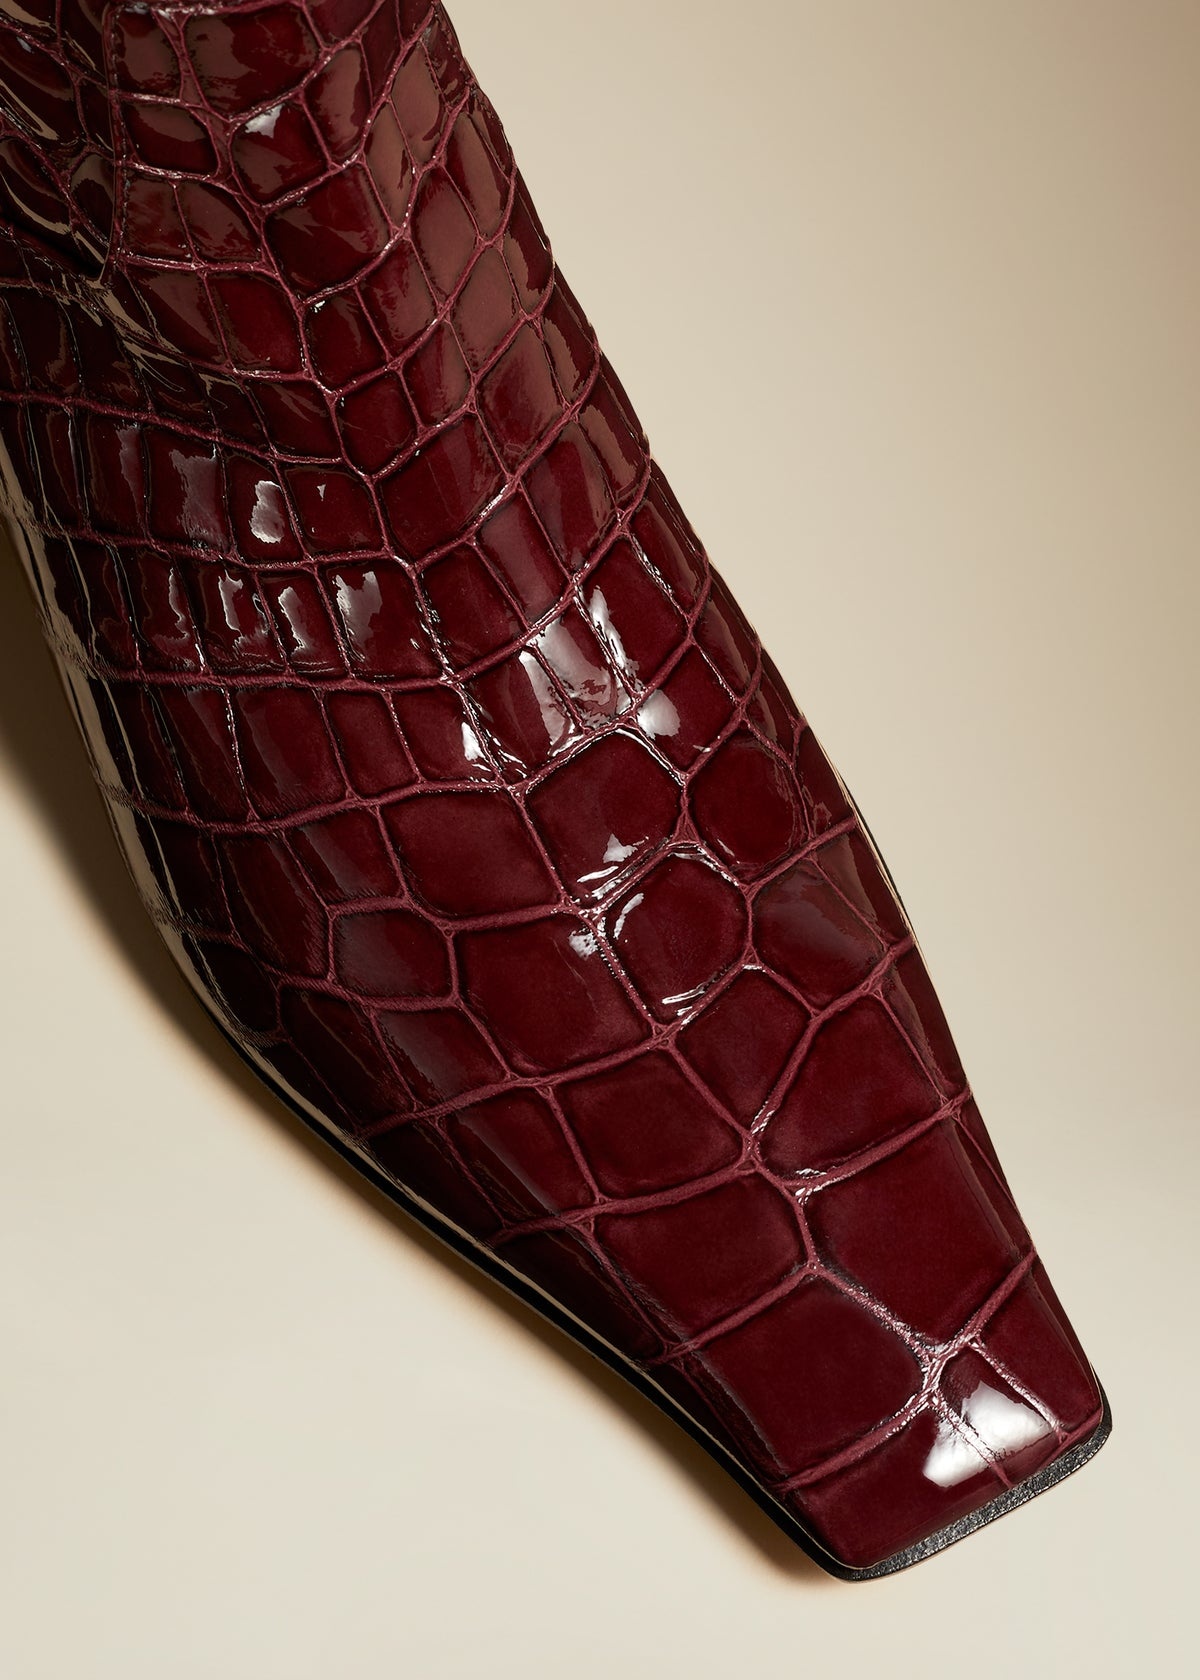 The Marfa Knee-High Boot in Bordeaux Croc-Embossed Leather - 4